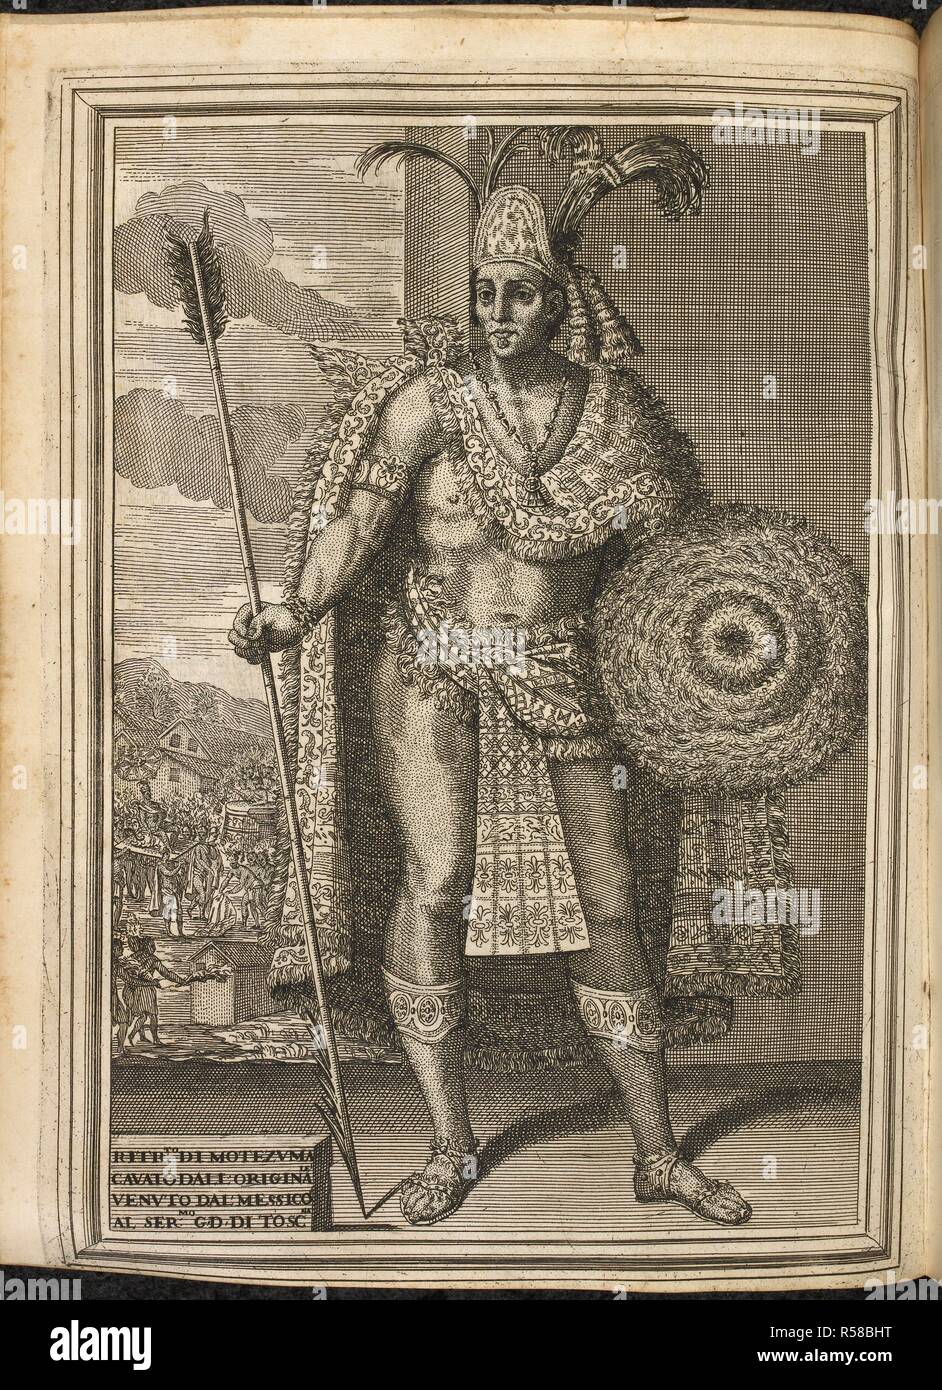 Moctezuma II (c. 1466 â€“ 29 June 1520), also known by a number of variant spellings including Montezuma, Moteuczoma, Motecuhzoma and referred to in full by early Nahuatl texts as Motecuhzoma Xocoyotzin (Moctezuma the Young). he was killed during the initial stages of the Spanish conquest of Mexico, when Conquistador HernÃ¡n CortÃ©s and his men fought to escape from the Aztec capital Tenochtitlan. Istoria della conquista del Messico ... scritta in Castigliano ... e tradotta in Toscano da un' Accademico della Crusca [F. Corsini]. Firenze, 1690. Source: 1446.k.18, page 299. Author: Solis y Ribad Stock Photo